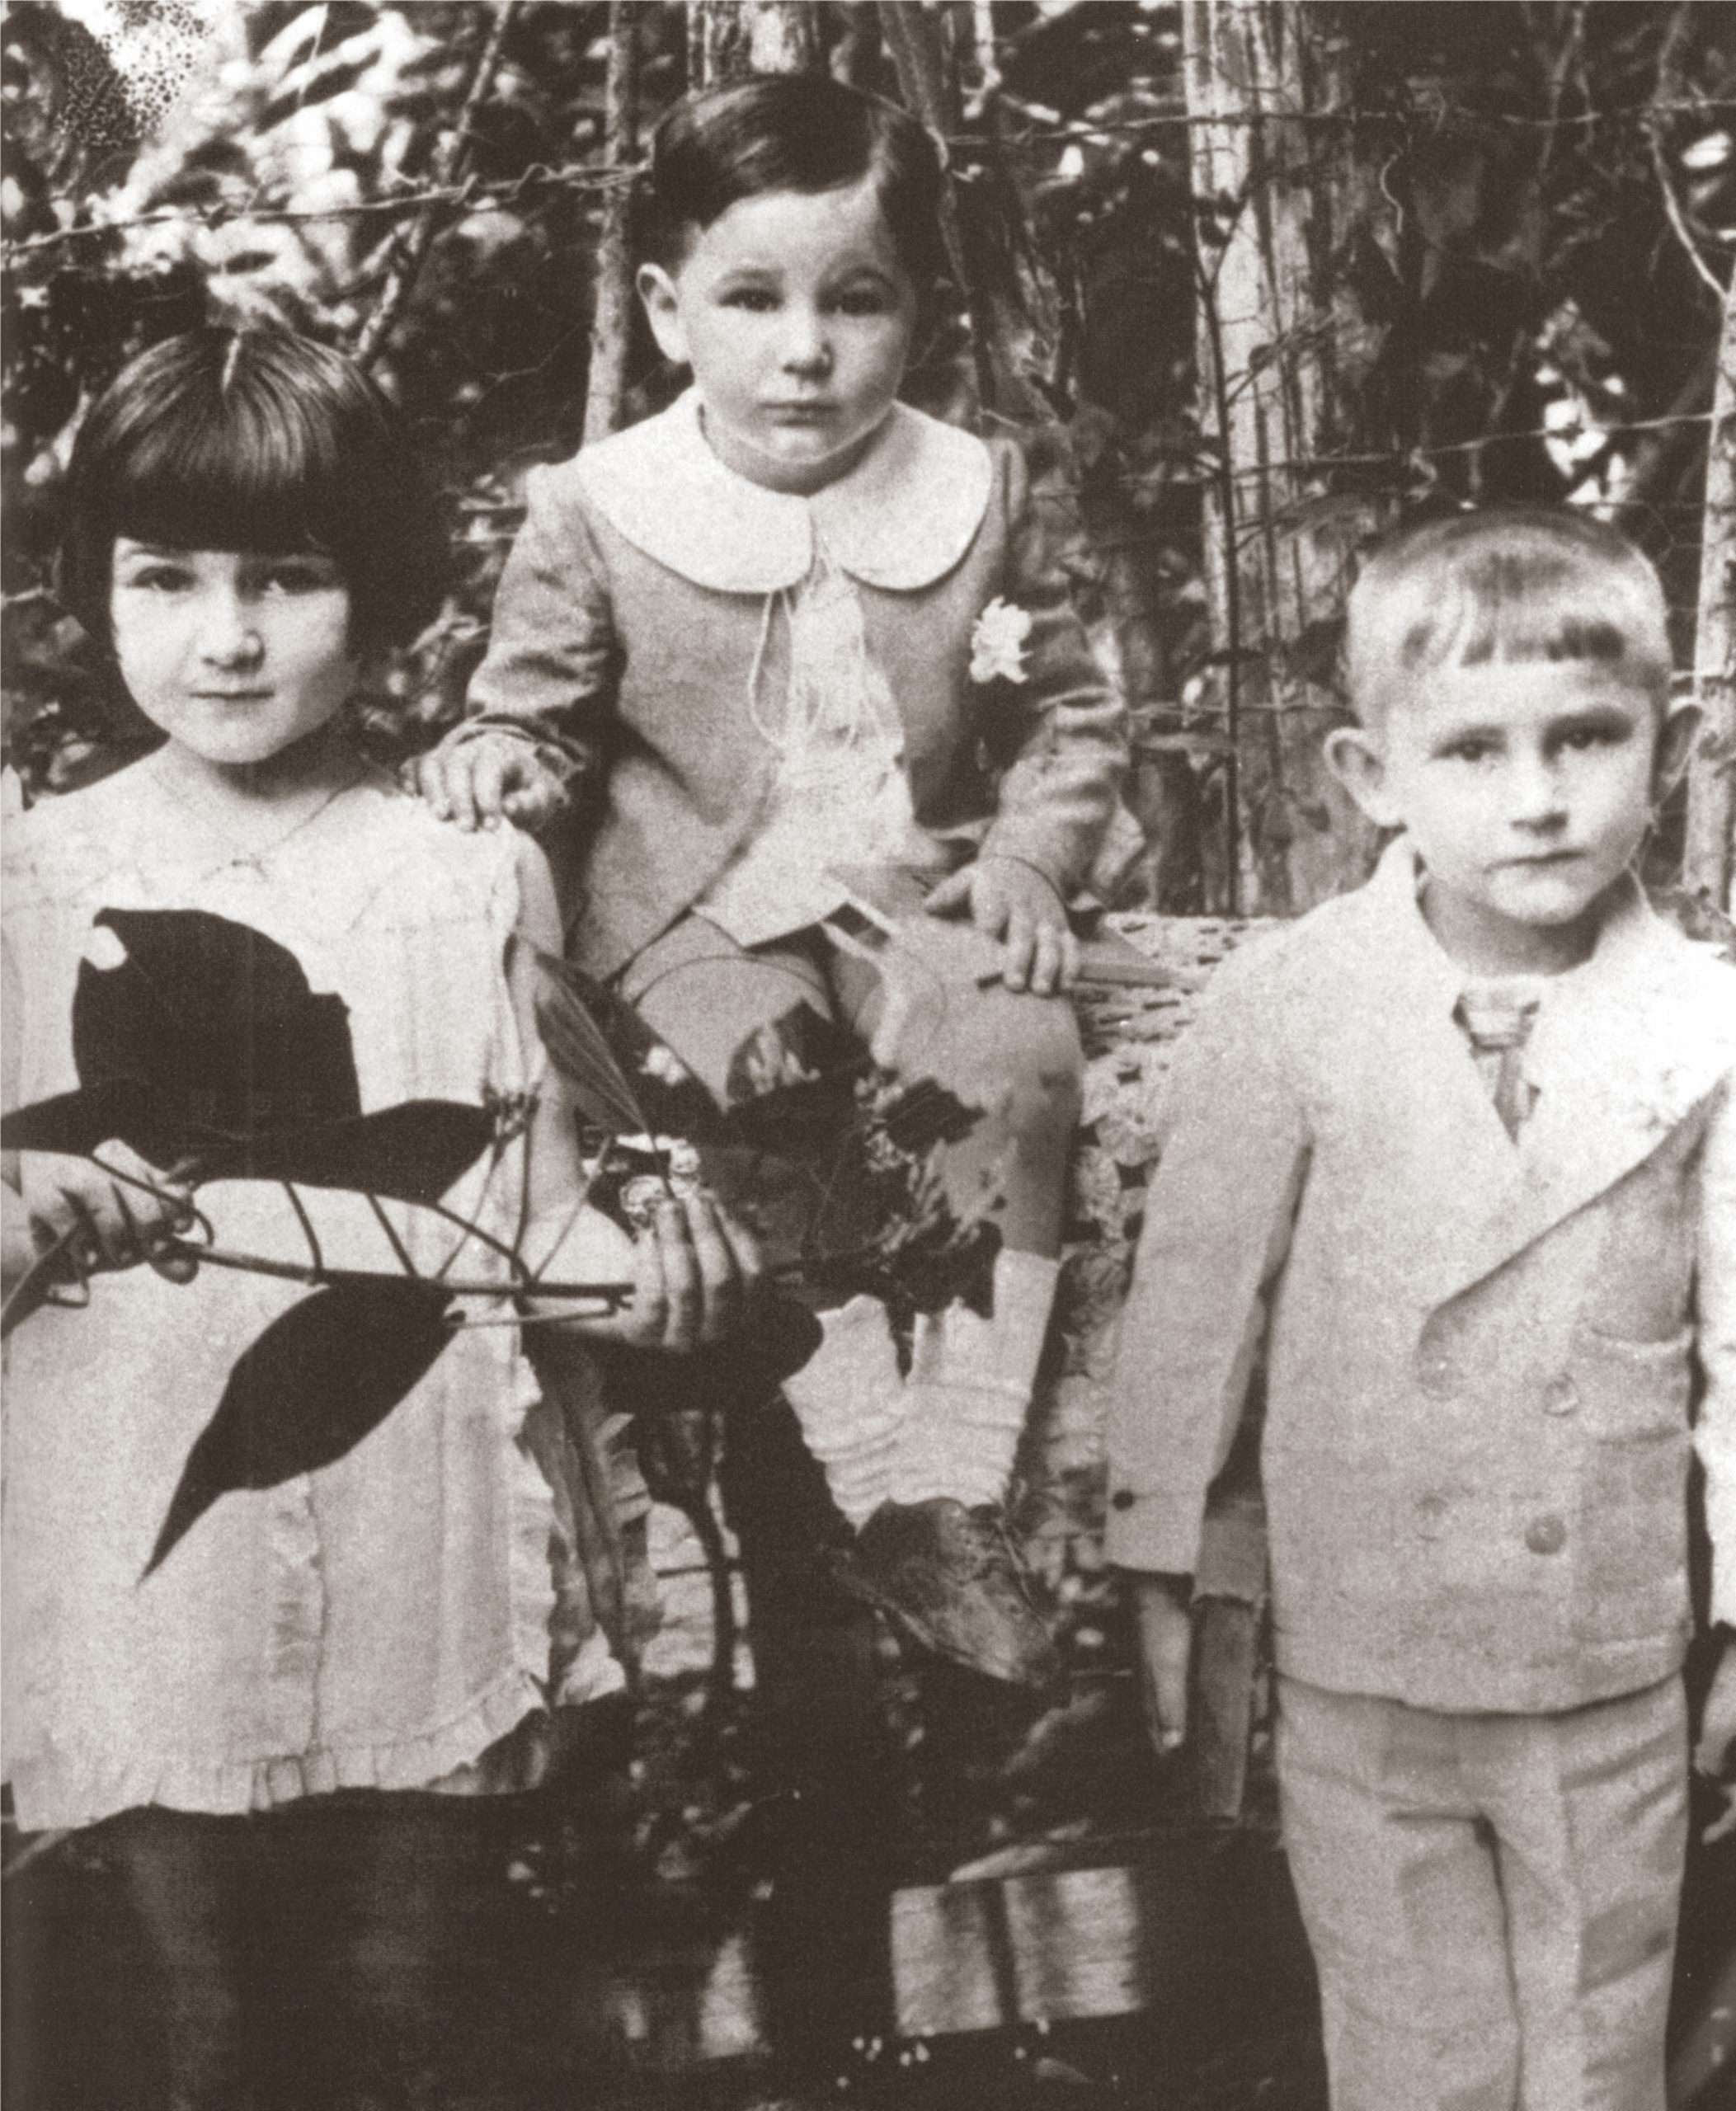 Fidel Castro, age 3, is seated in between his sister, Angelita, 6, and brother Ramon, 4, in 1929.